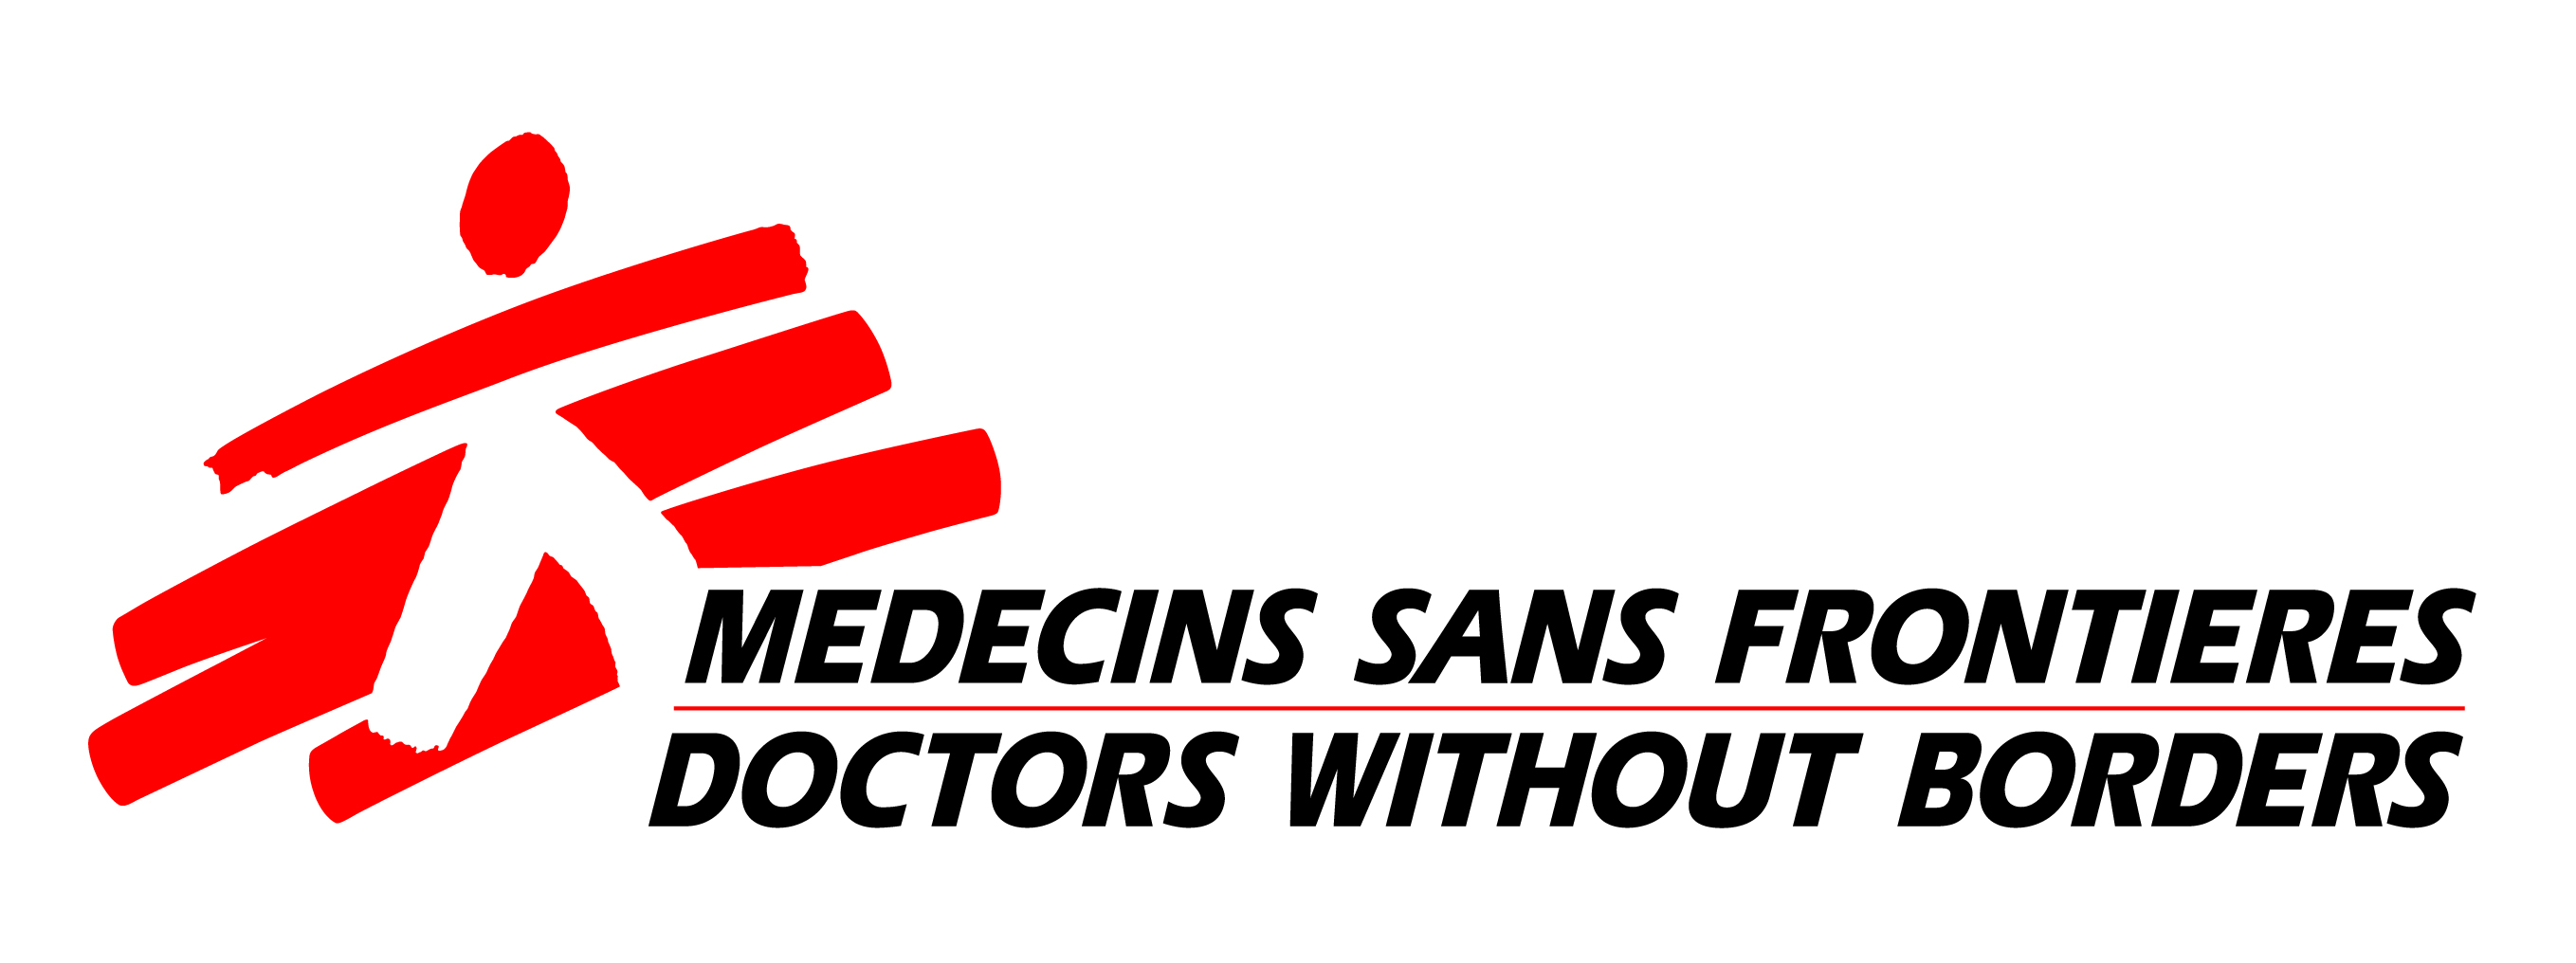 Doctors-Without-Borders.jpg